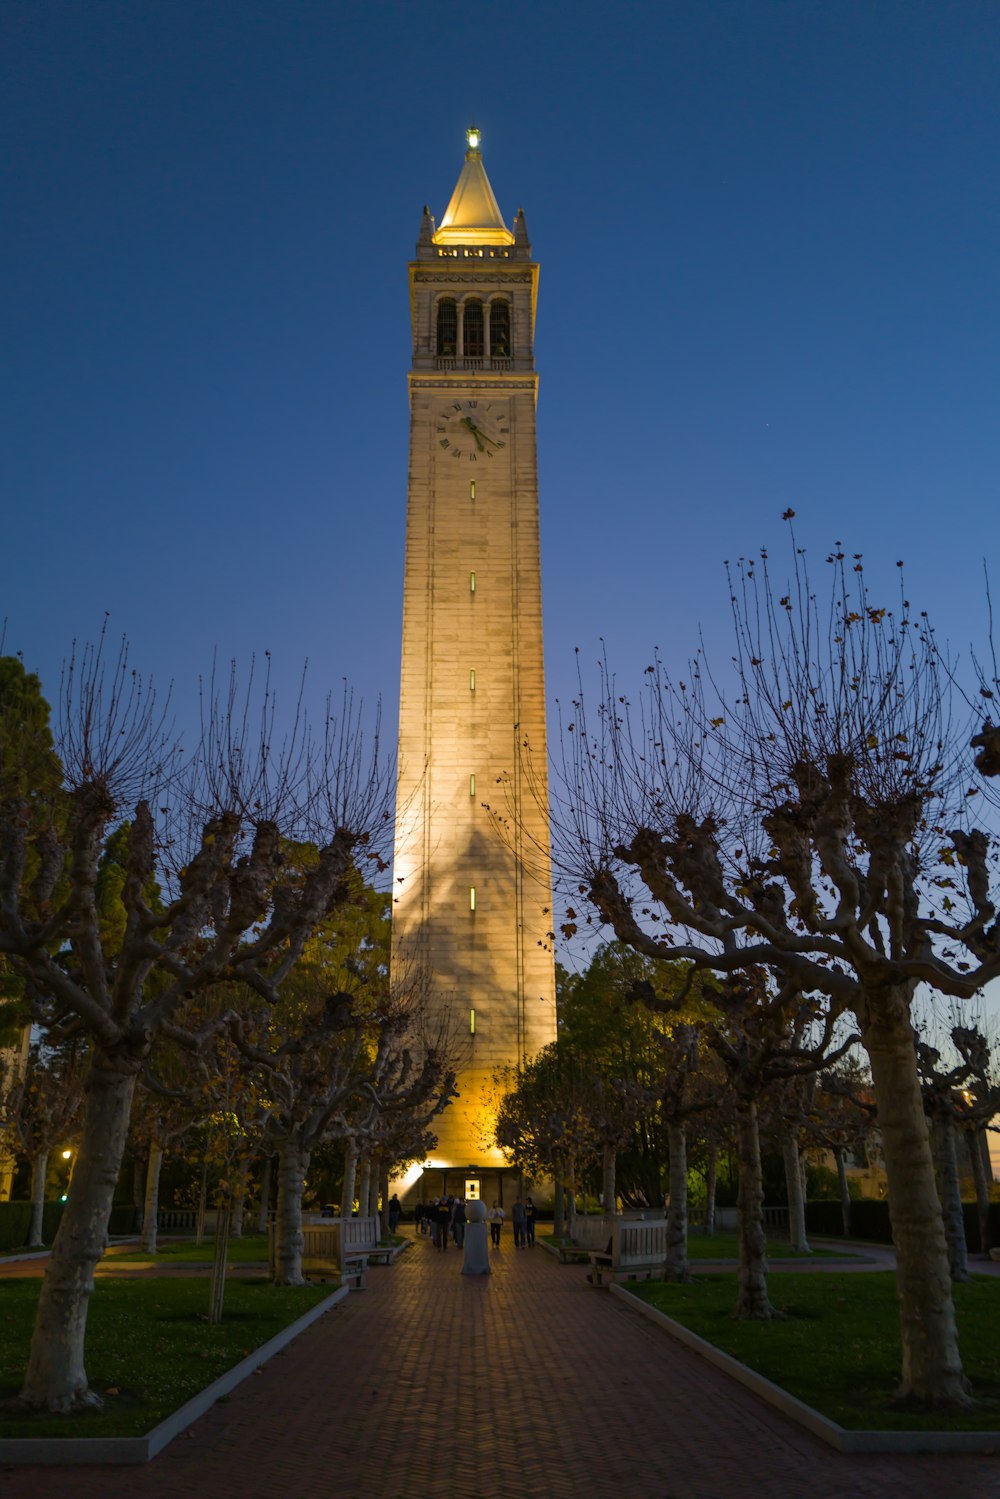 a tall clock tower towering over a park filled with trees